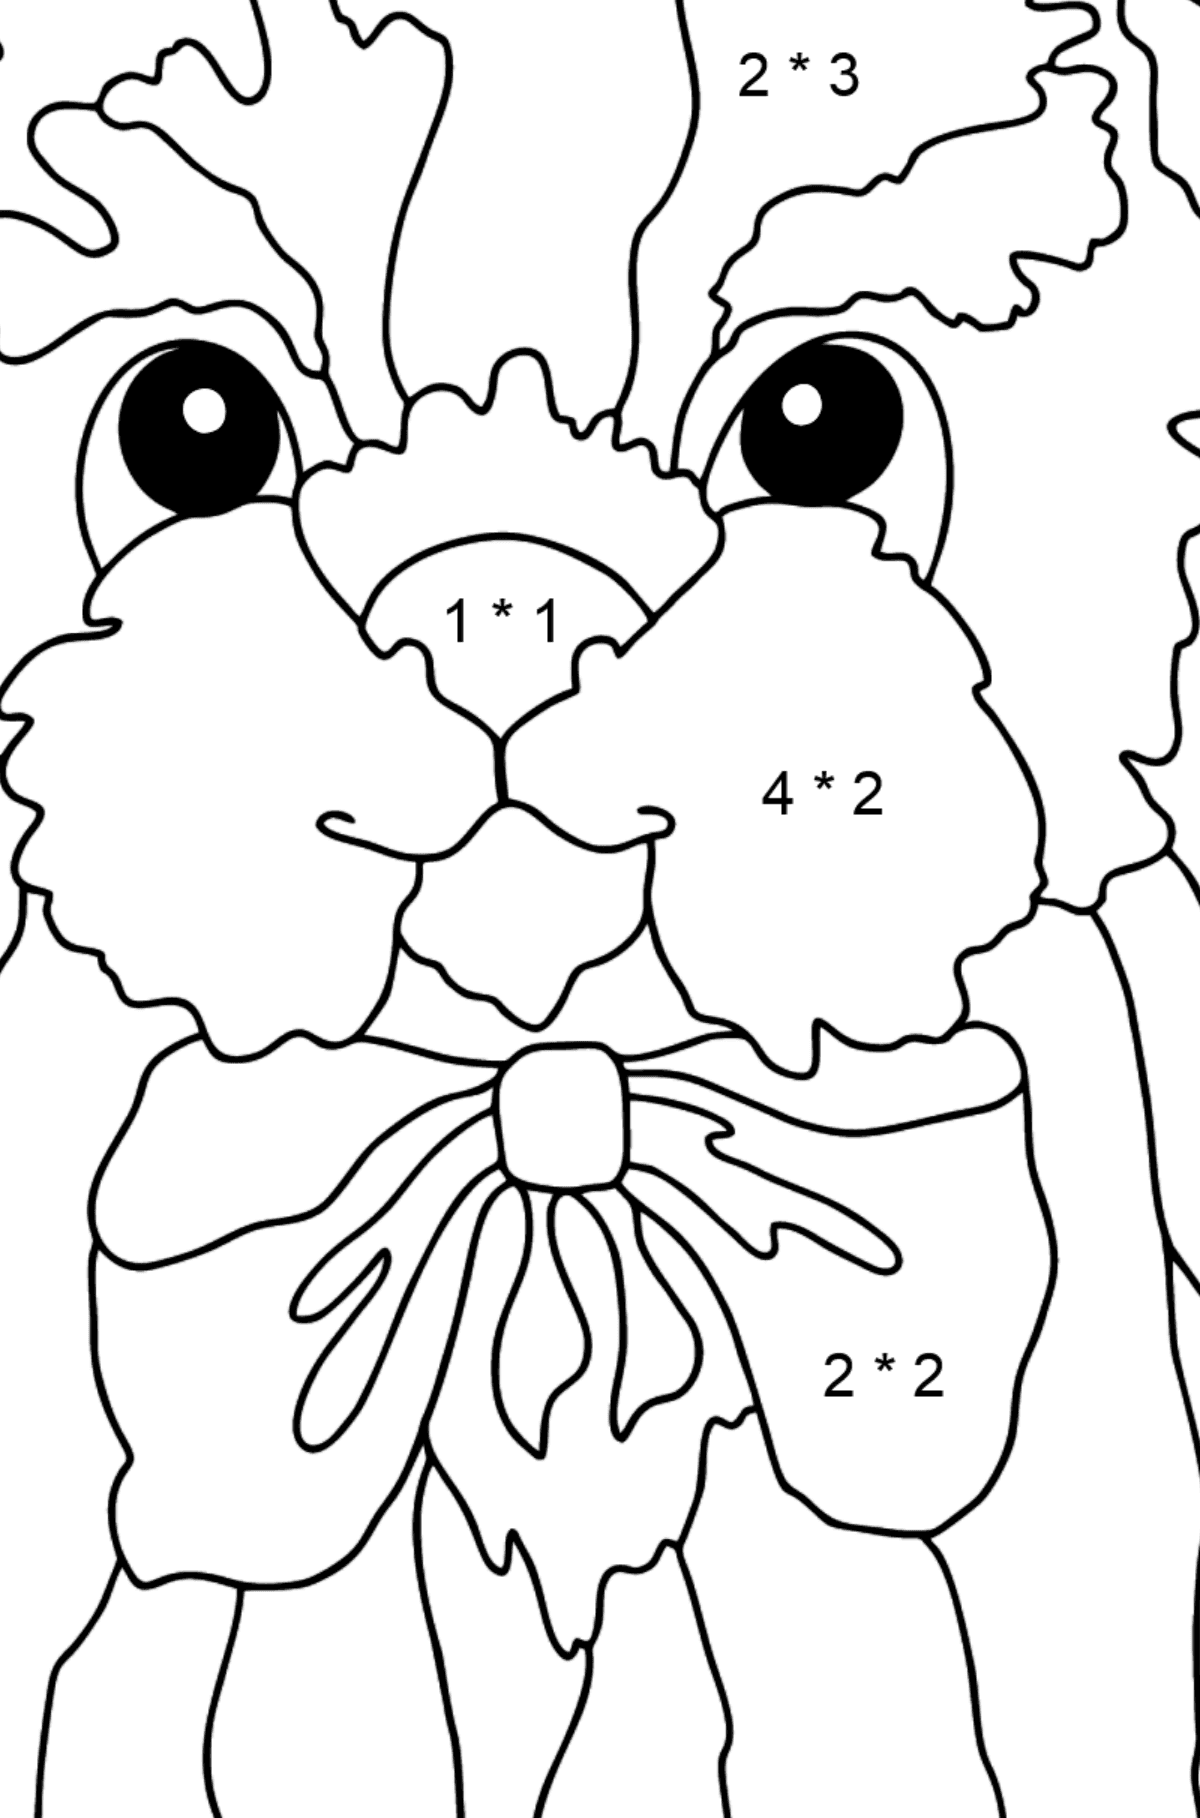 Coloring Page - A Young Fluffy Dog - Math Coloring - Multiplication for Kids